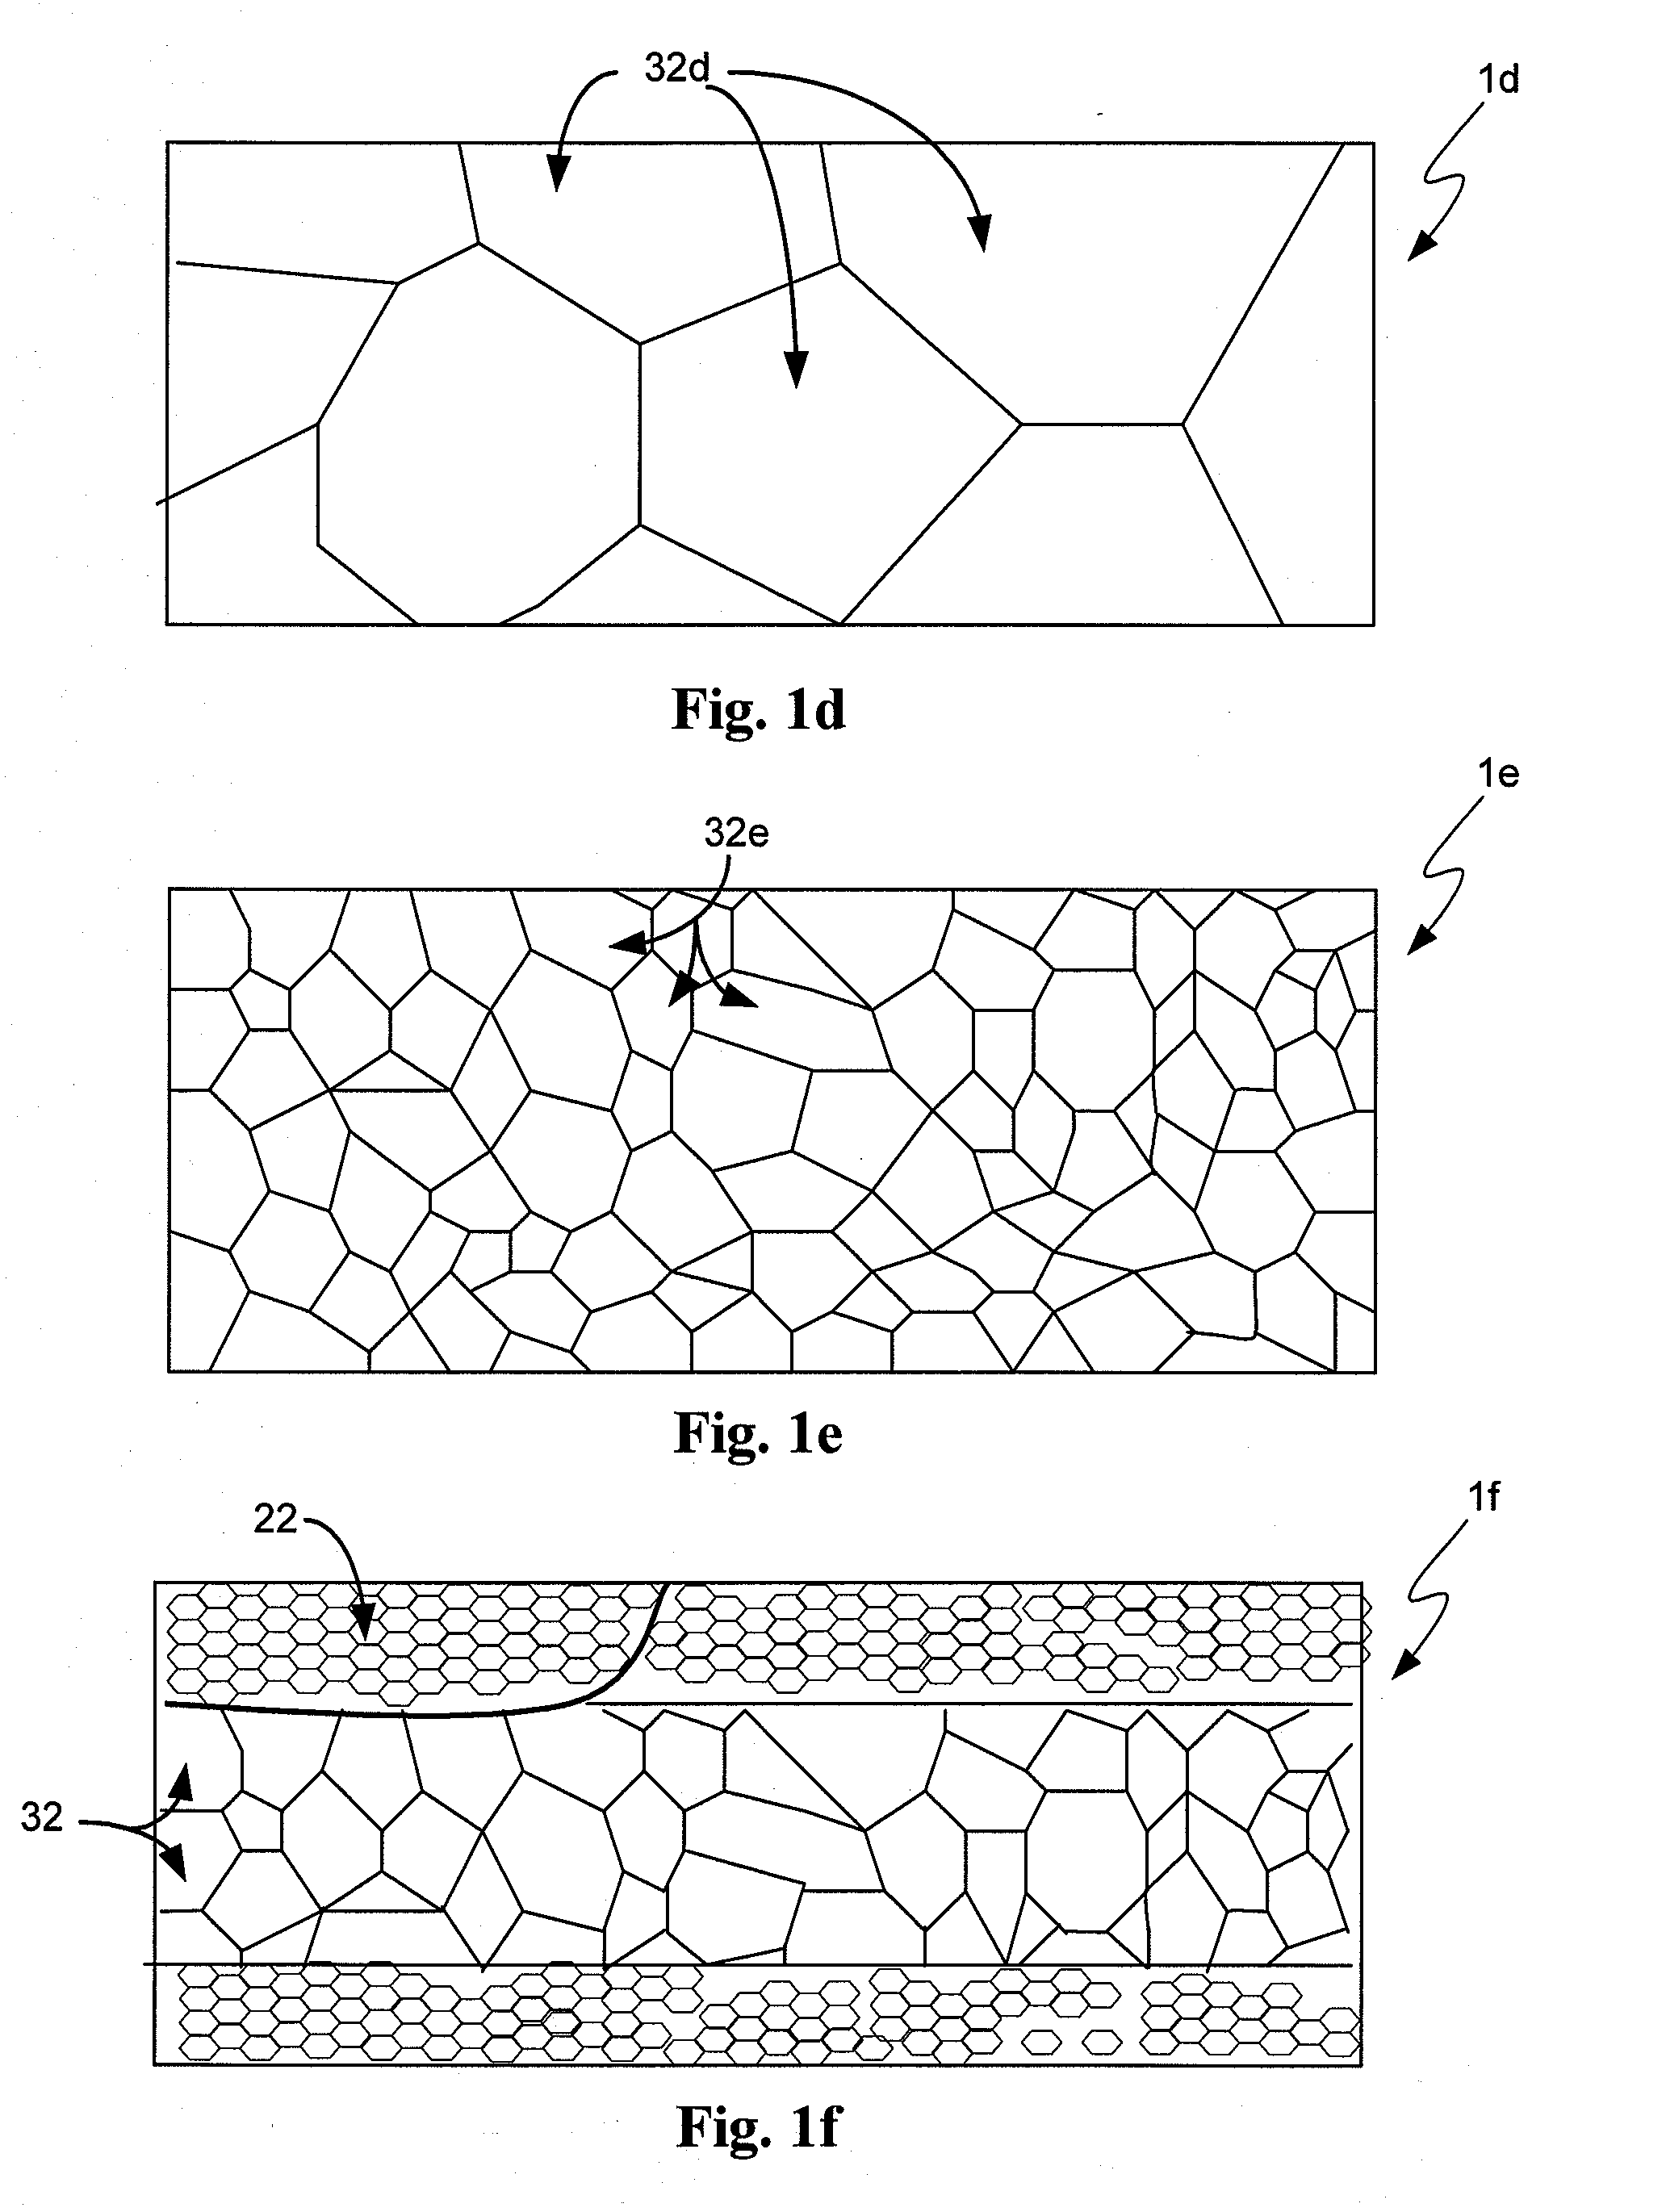 Recrystallized aluminum alloys with brass texture and methods of making the same